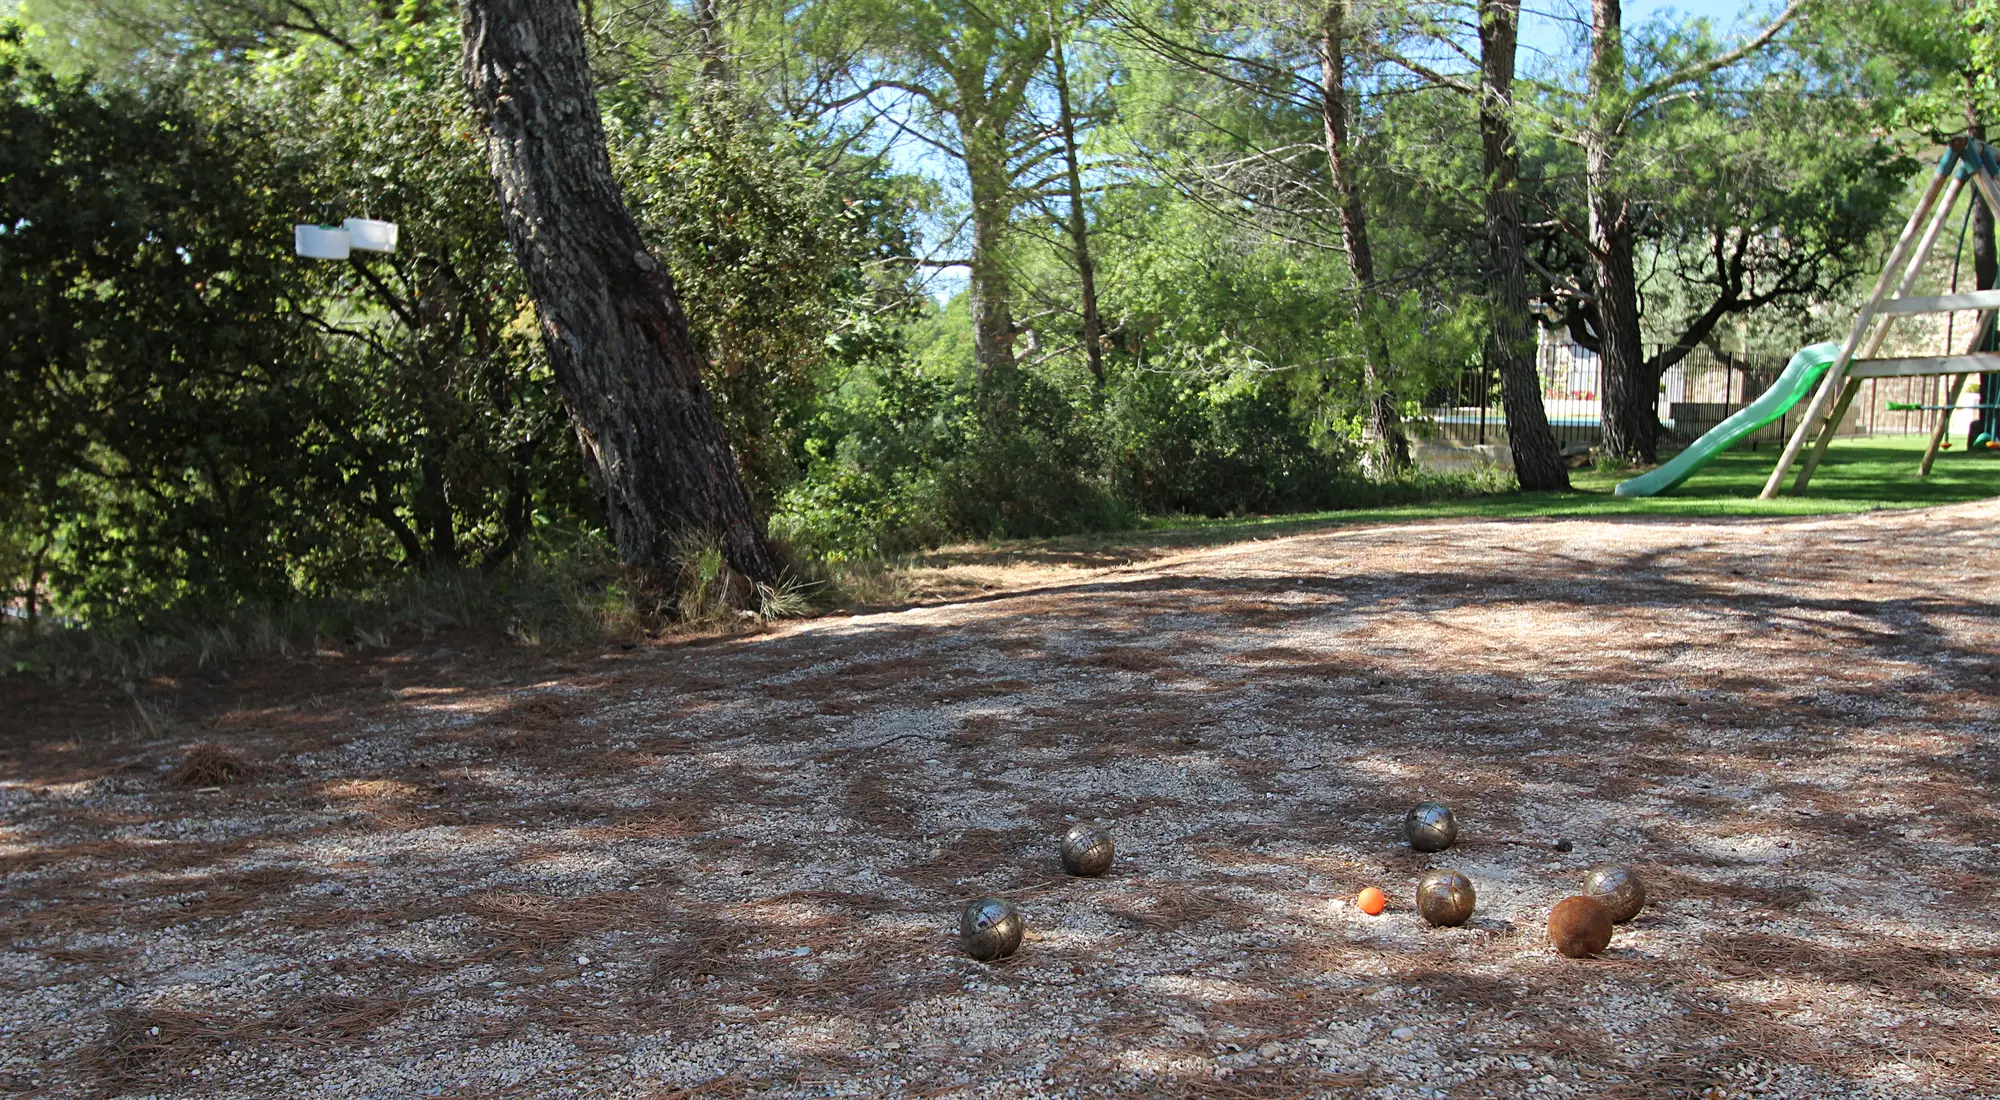 Petanque under the pine trees